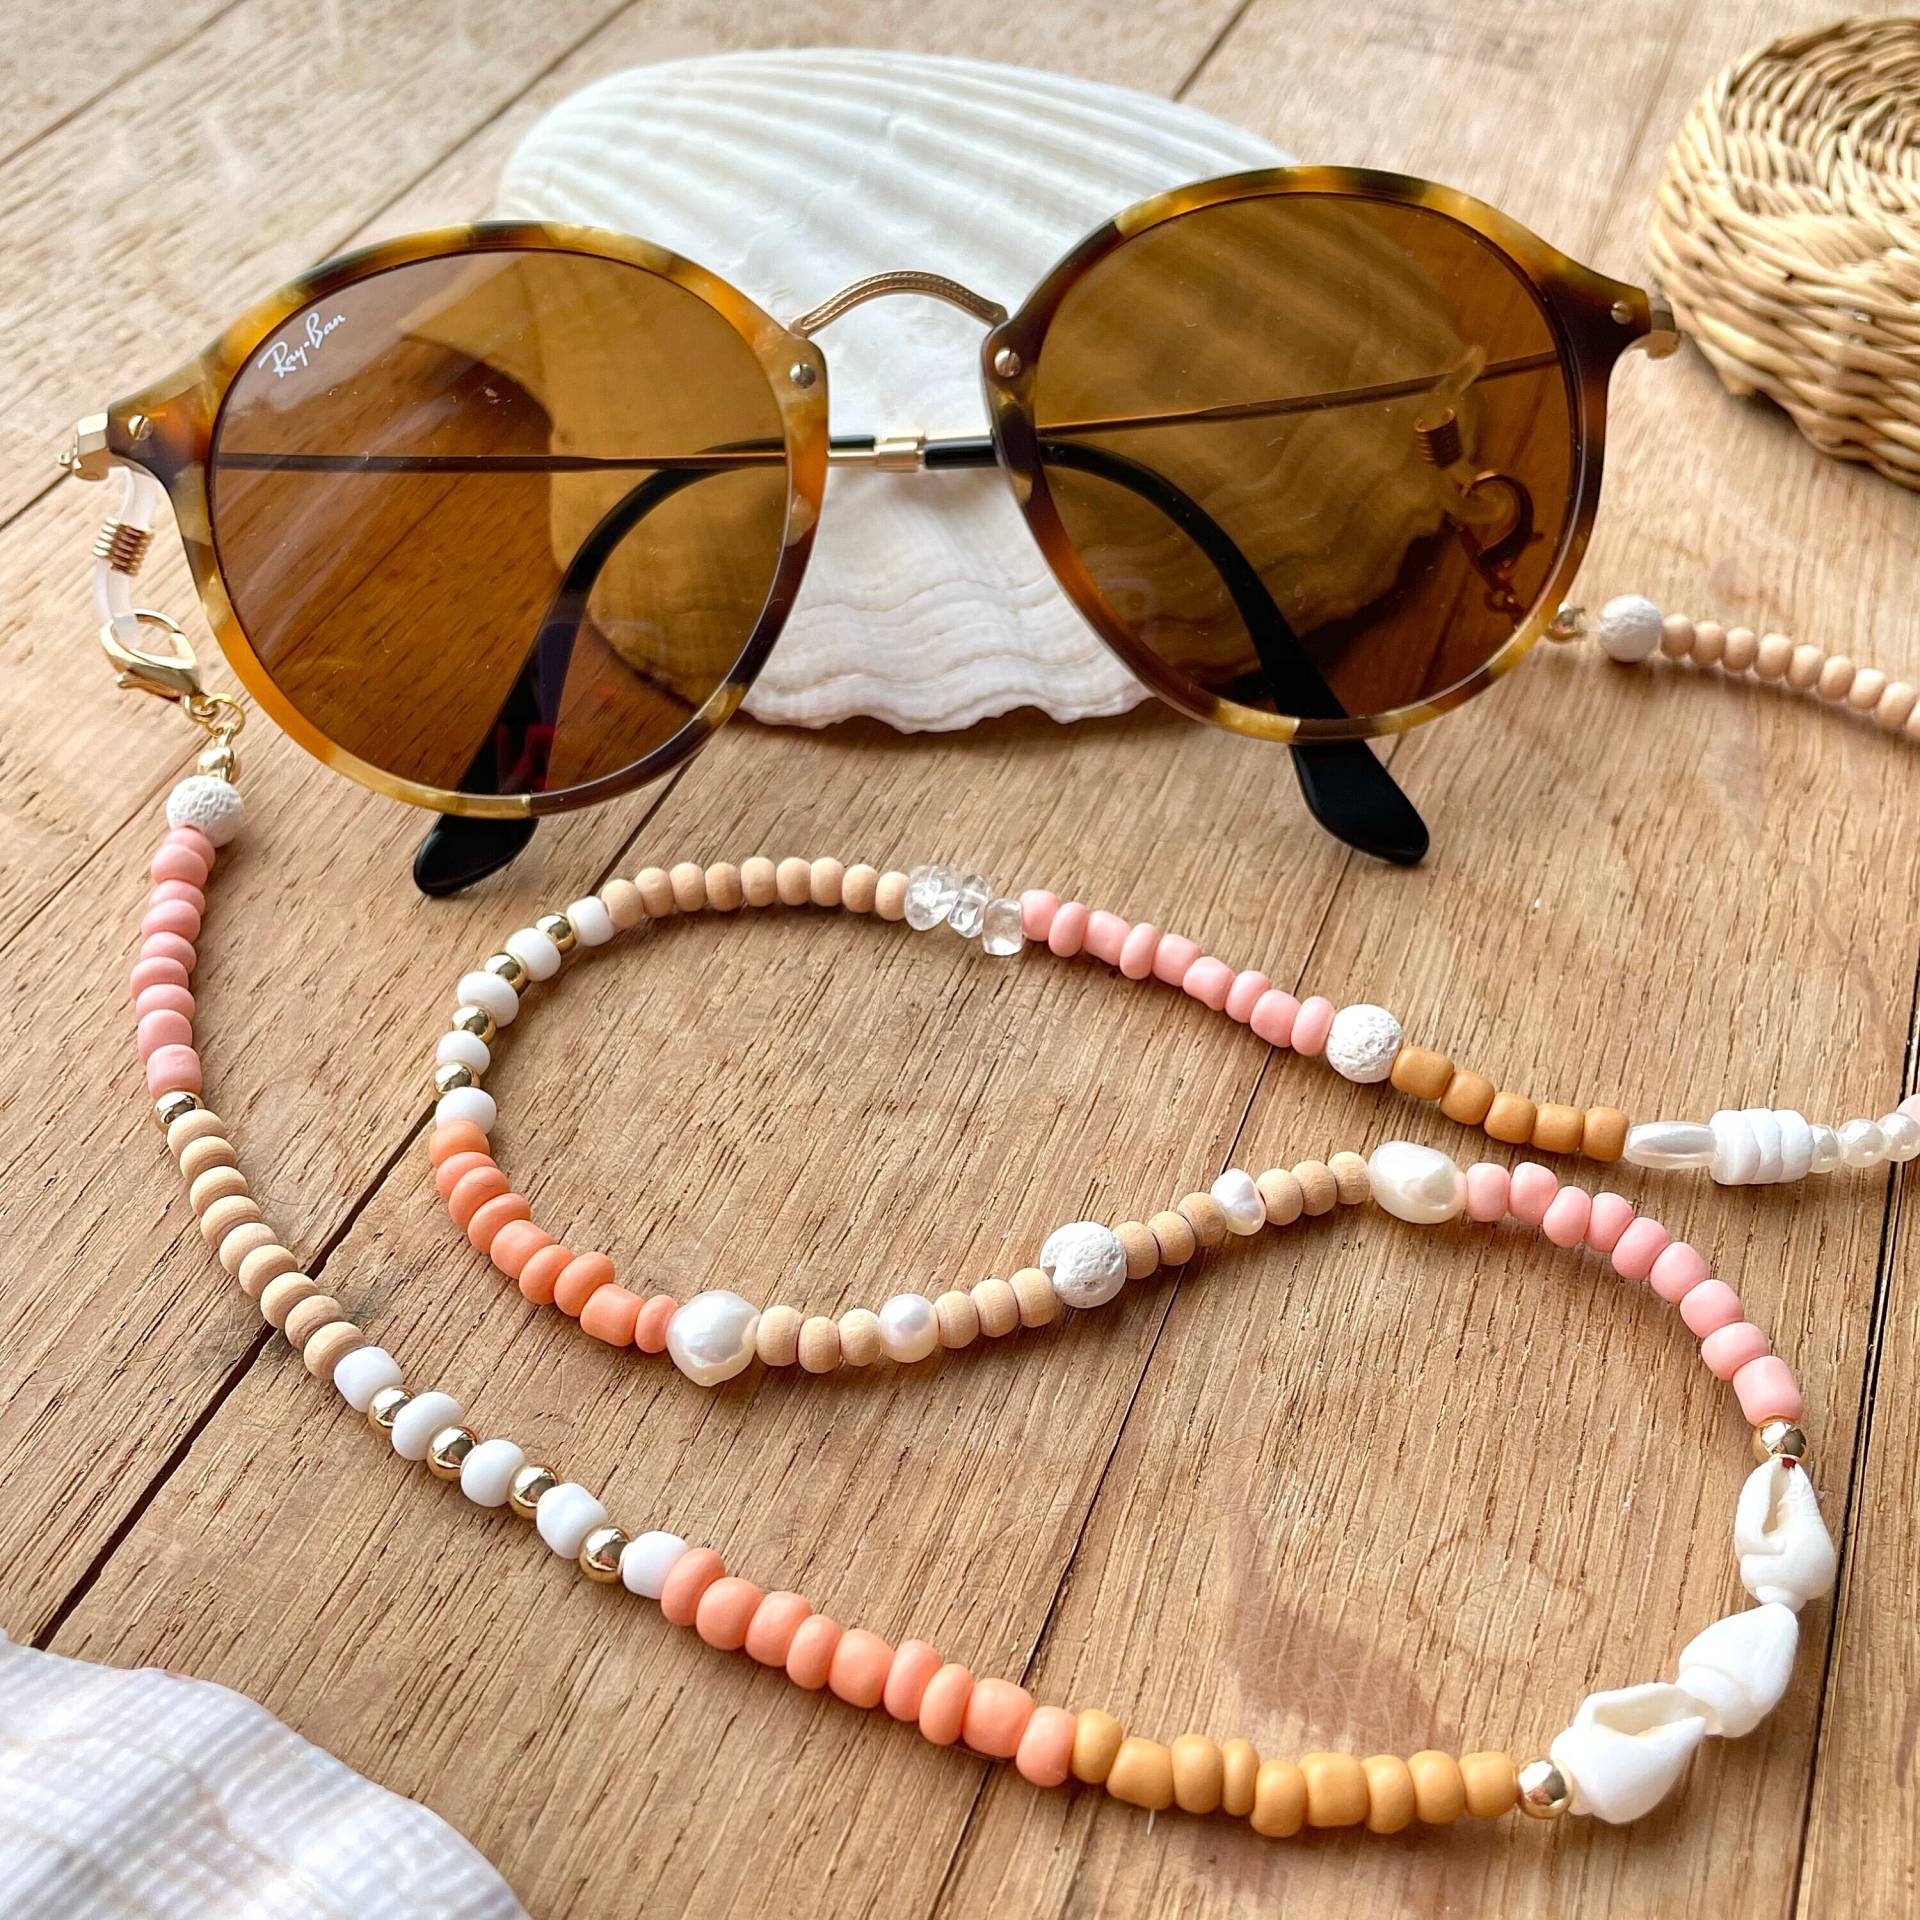 Sunglass Chain Accessoires Mask Holder For Glasses Shells Freshwater Pearls Strap Gift Beige Natural Tones von muymar